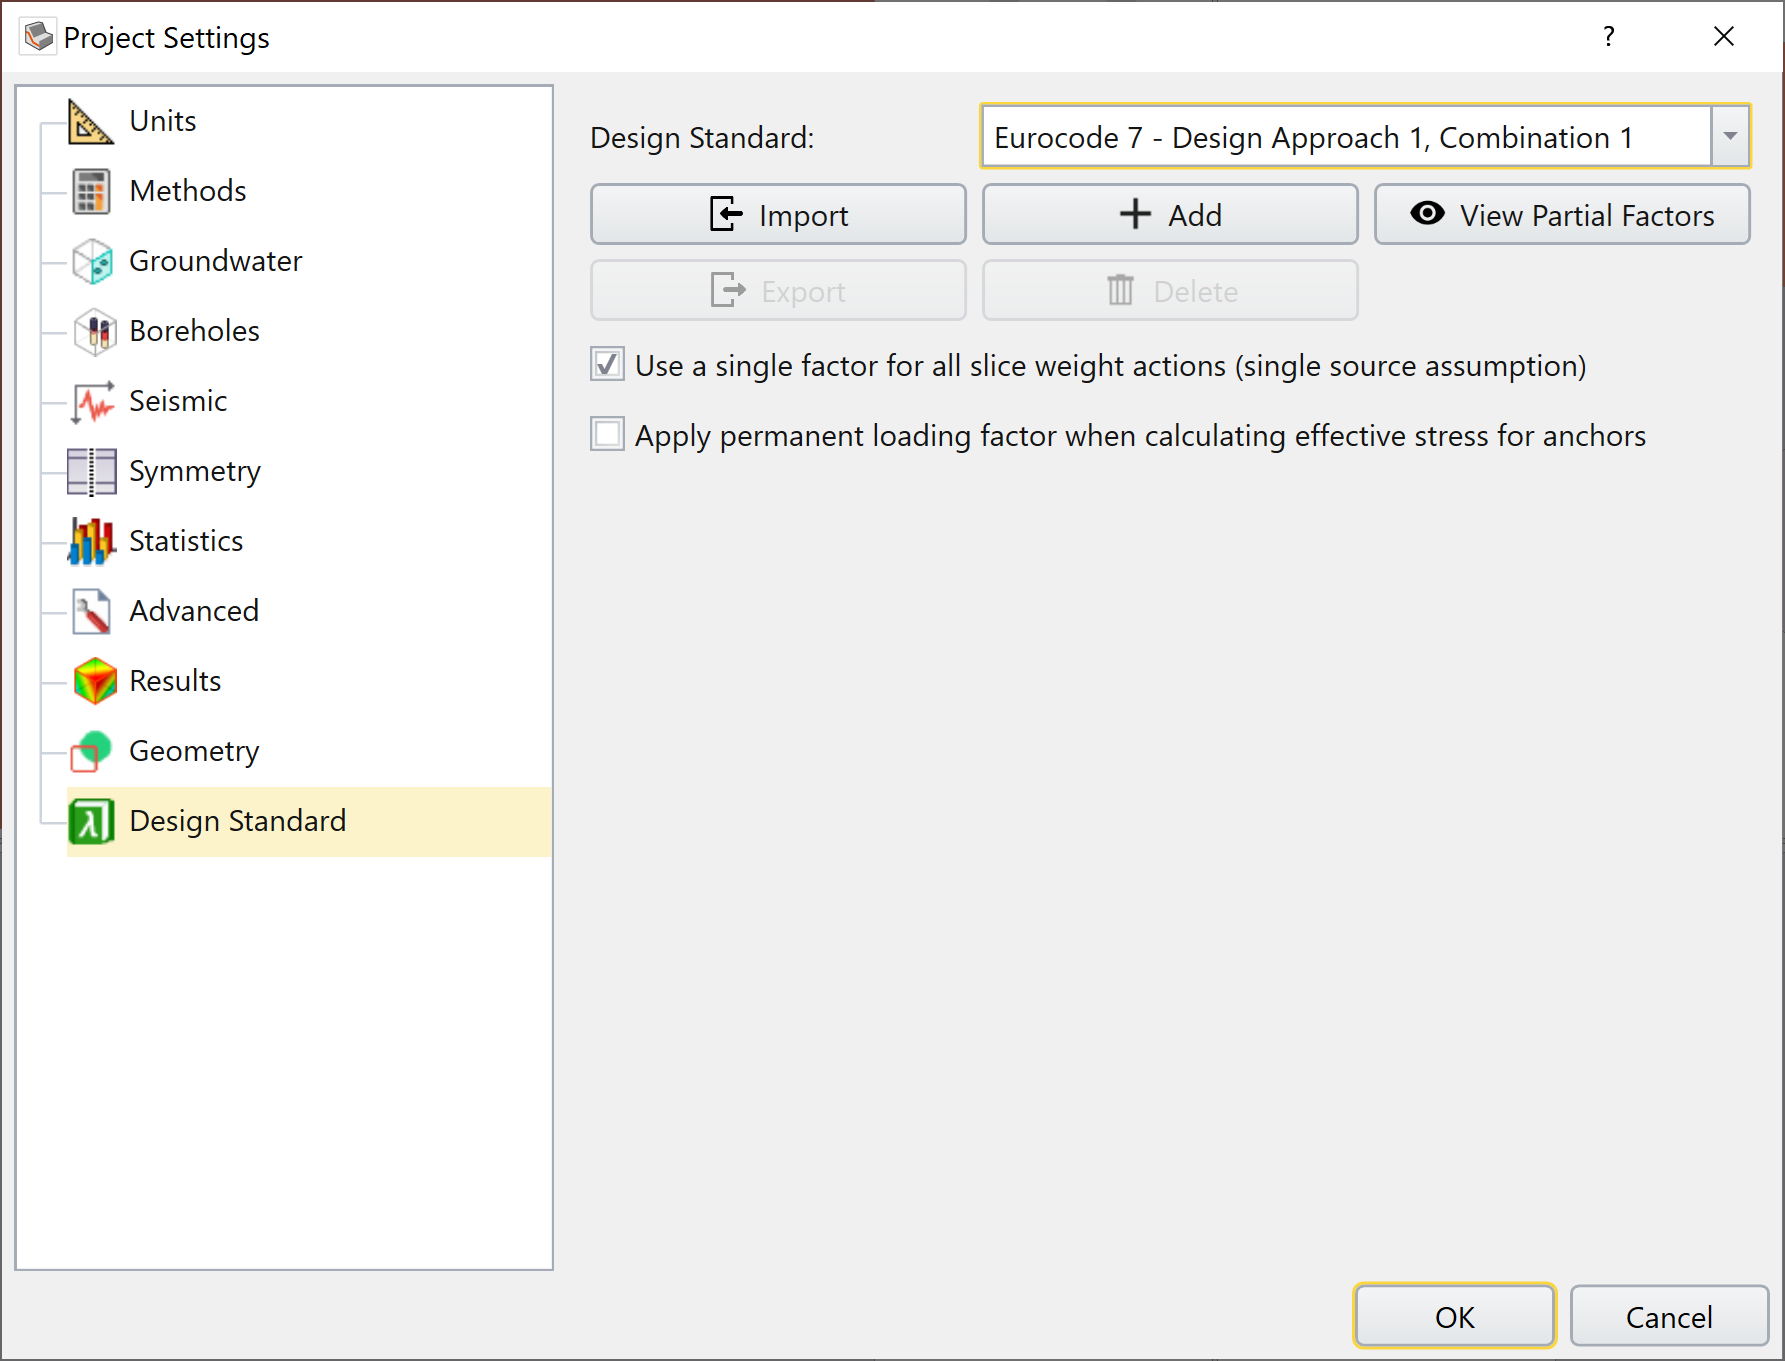 Project Settings - Design Standards tab with Eurocode 7: Approach 1, Combination 1 selected